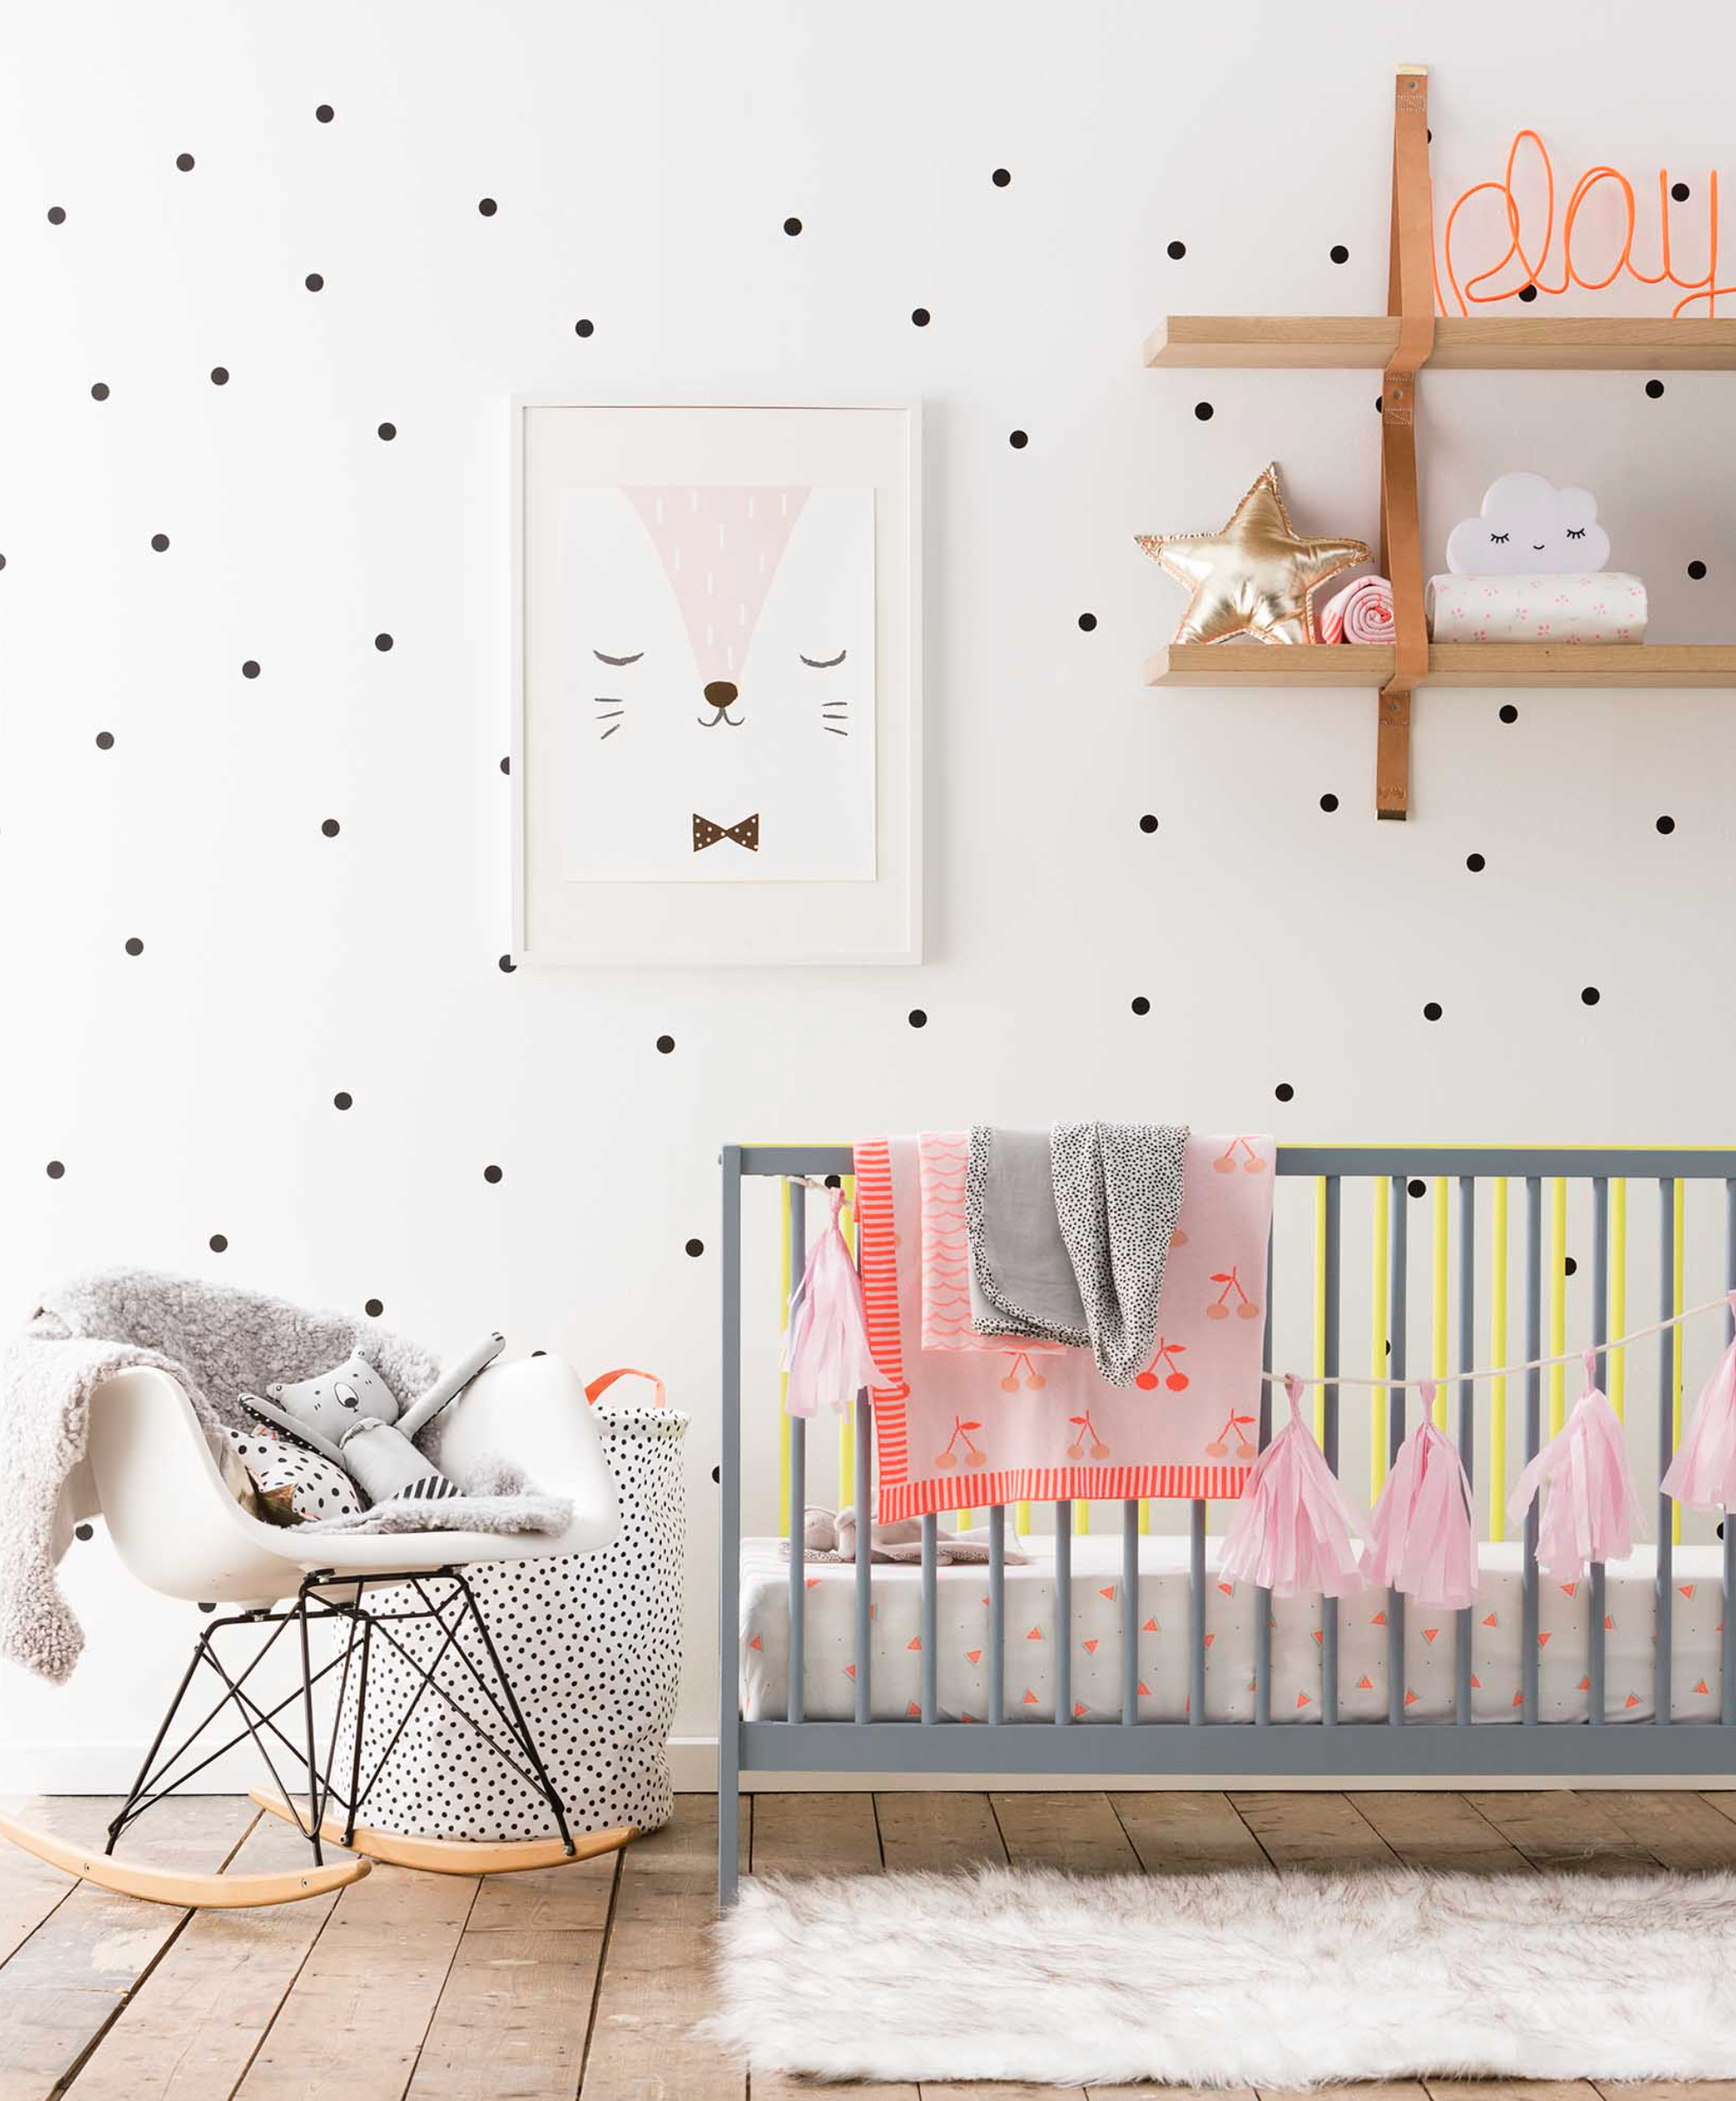 Small black polka dots on the nursery wall, grey crib, white Eames rocking chair and light brown wooden shelves